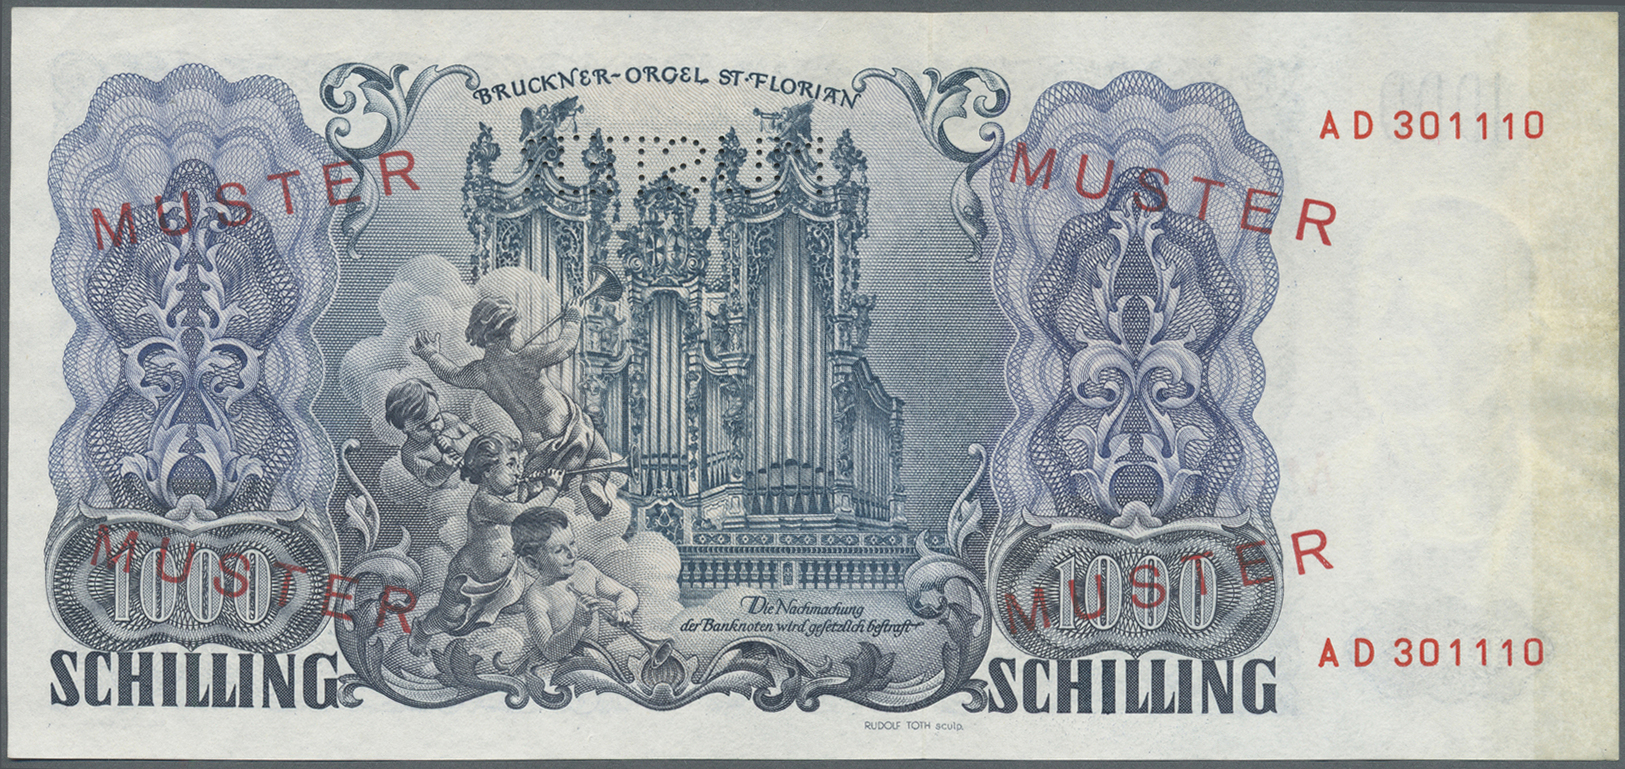 00200 Austria / Österreich: Rare high value set of 20 Specimen banknotes from Austria containing the following notes: 50